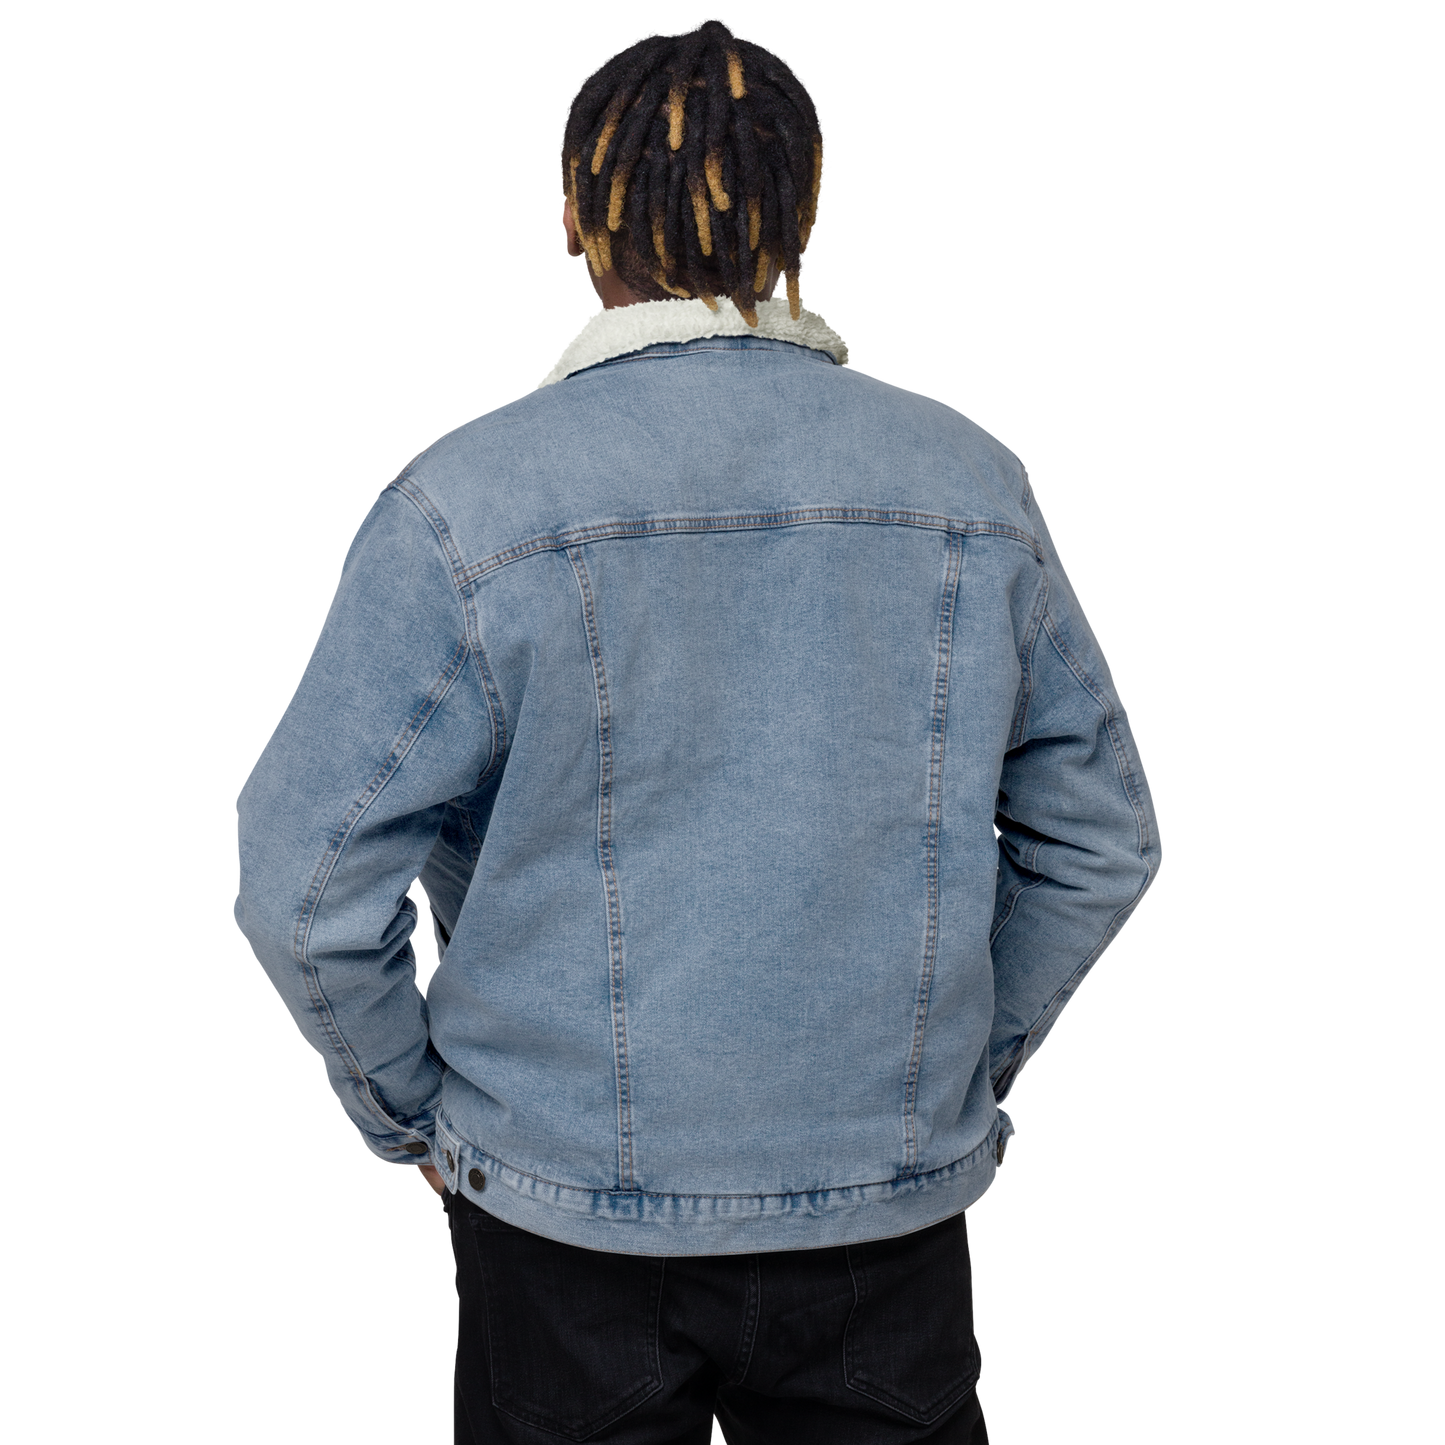 YHM Designs - YXY Whitehorse Denim Sherpa Jacket - Crossed-X Design with Airport Code and Vintage Propliner - Black & White Embroidery - Image 12